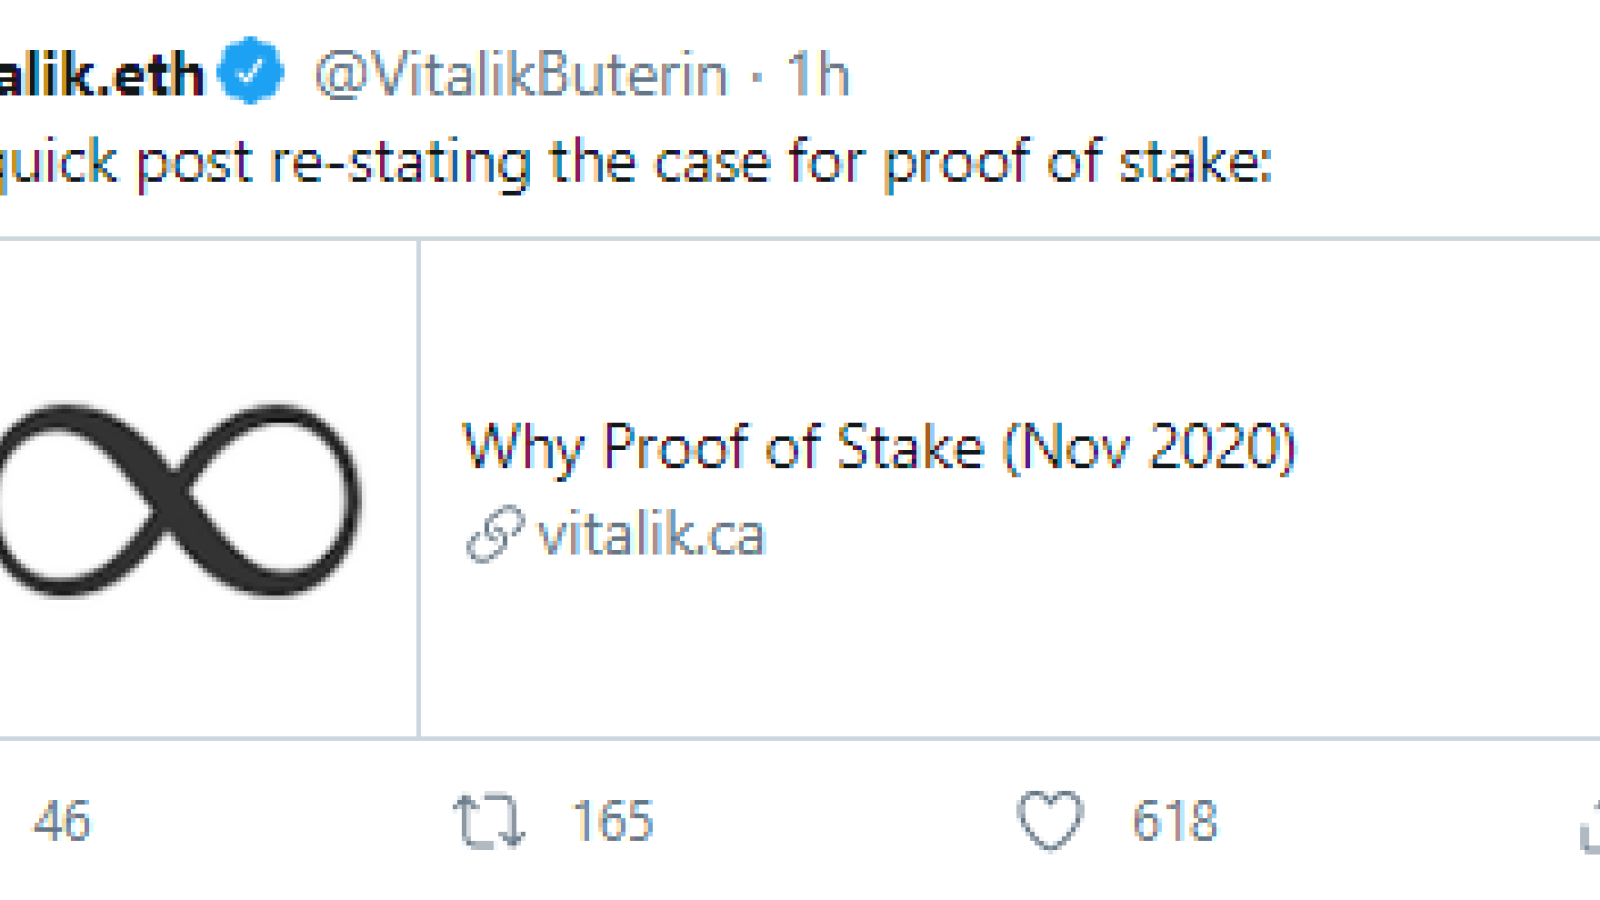 Vitalik Buterin indicated benefits of Proof-of-Stake